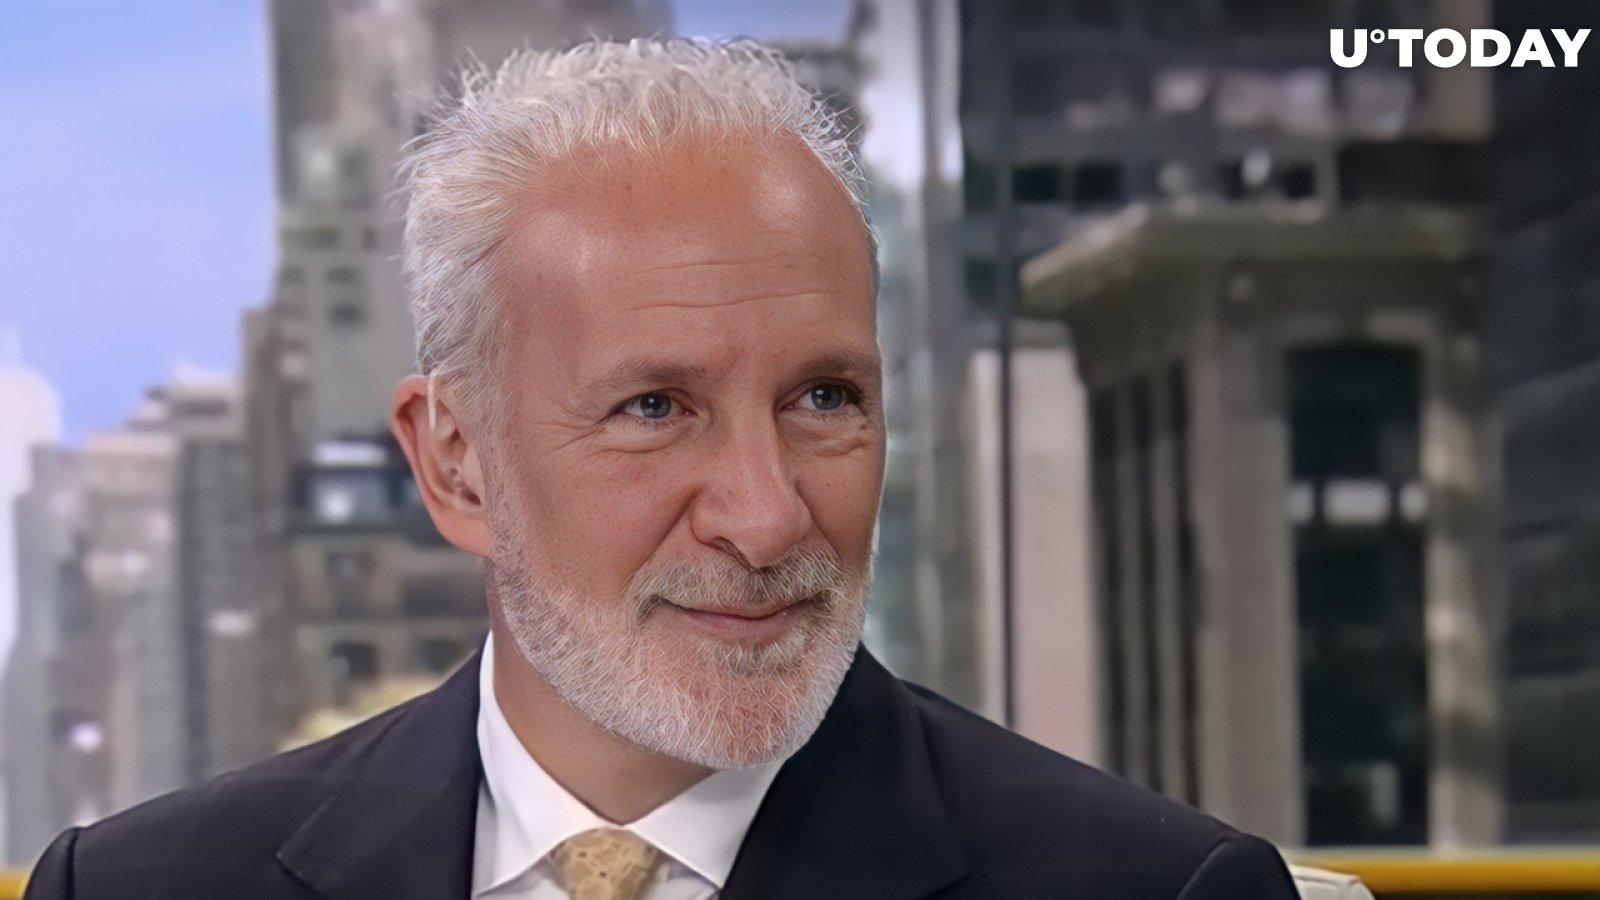 Economist Peter Schiff Says His Prediction for BTC and ETH Prices Nearly 100% Confirmed